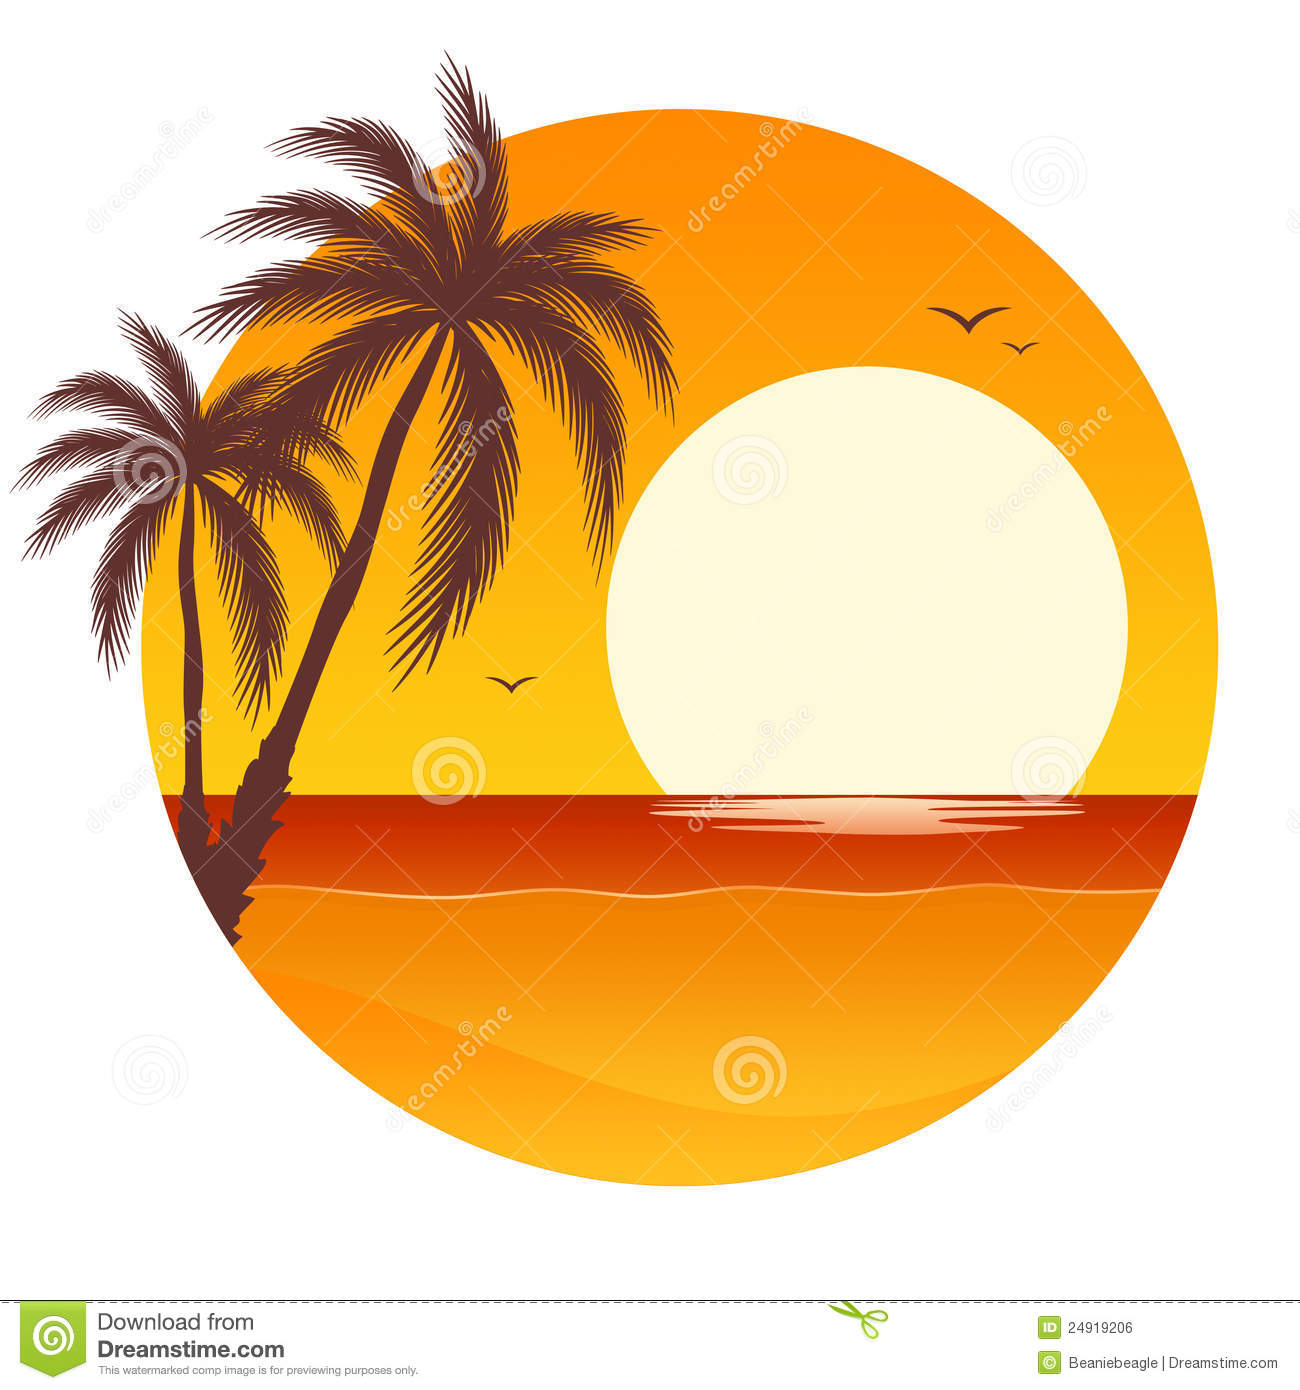 Sunset With Palm Trees Royalty Free Stock Image   Image  24919206